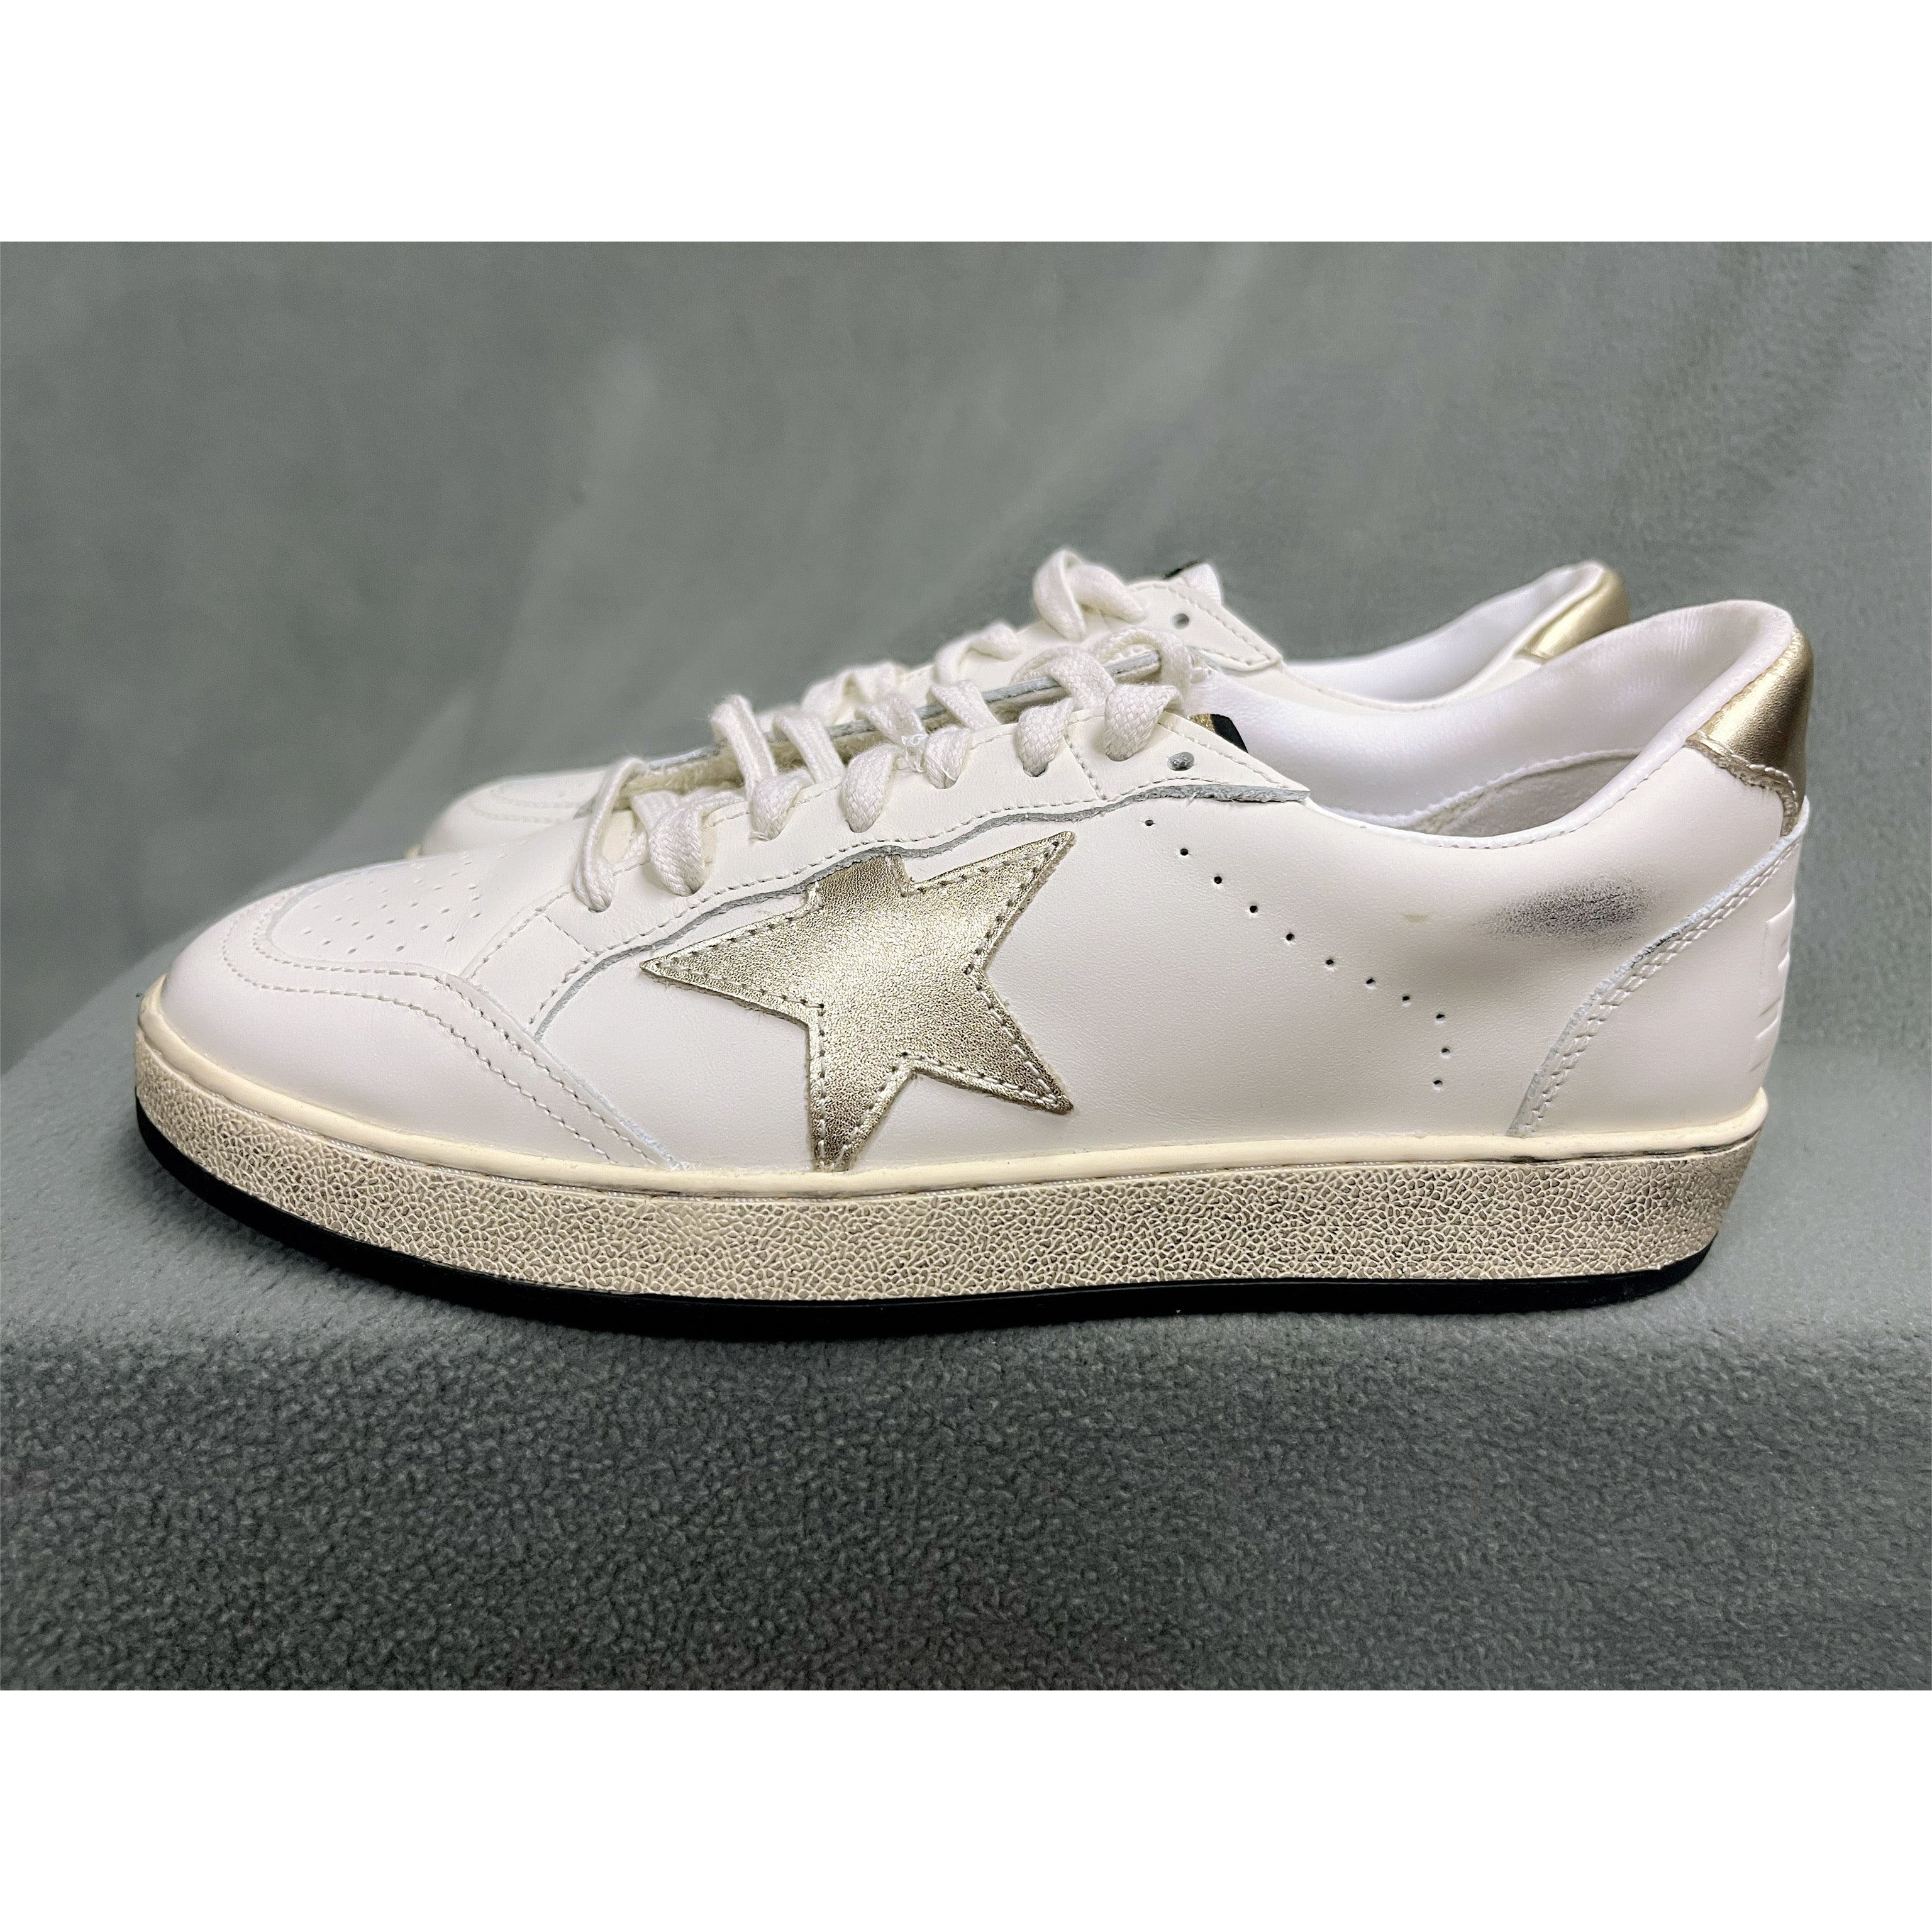 Golden Goose cream and gold Ballstar sneakers, size 39, BRAND NEW!